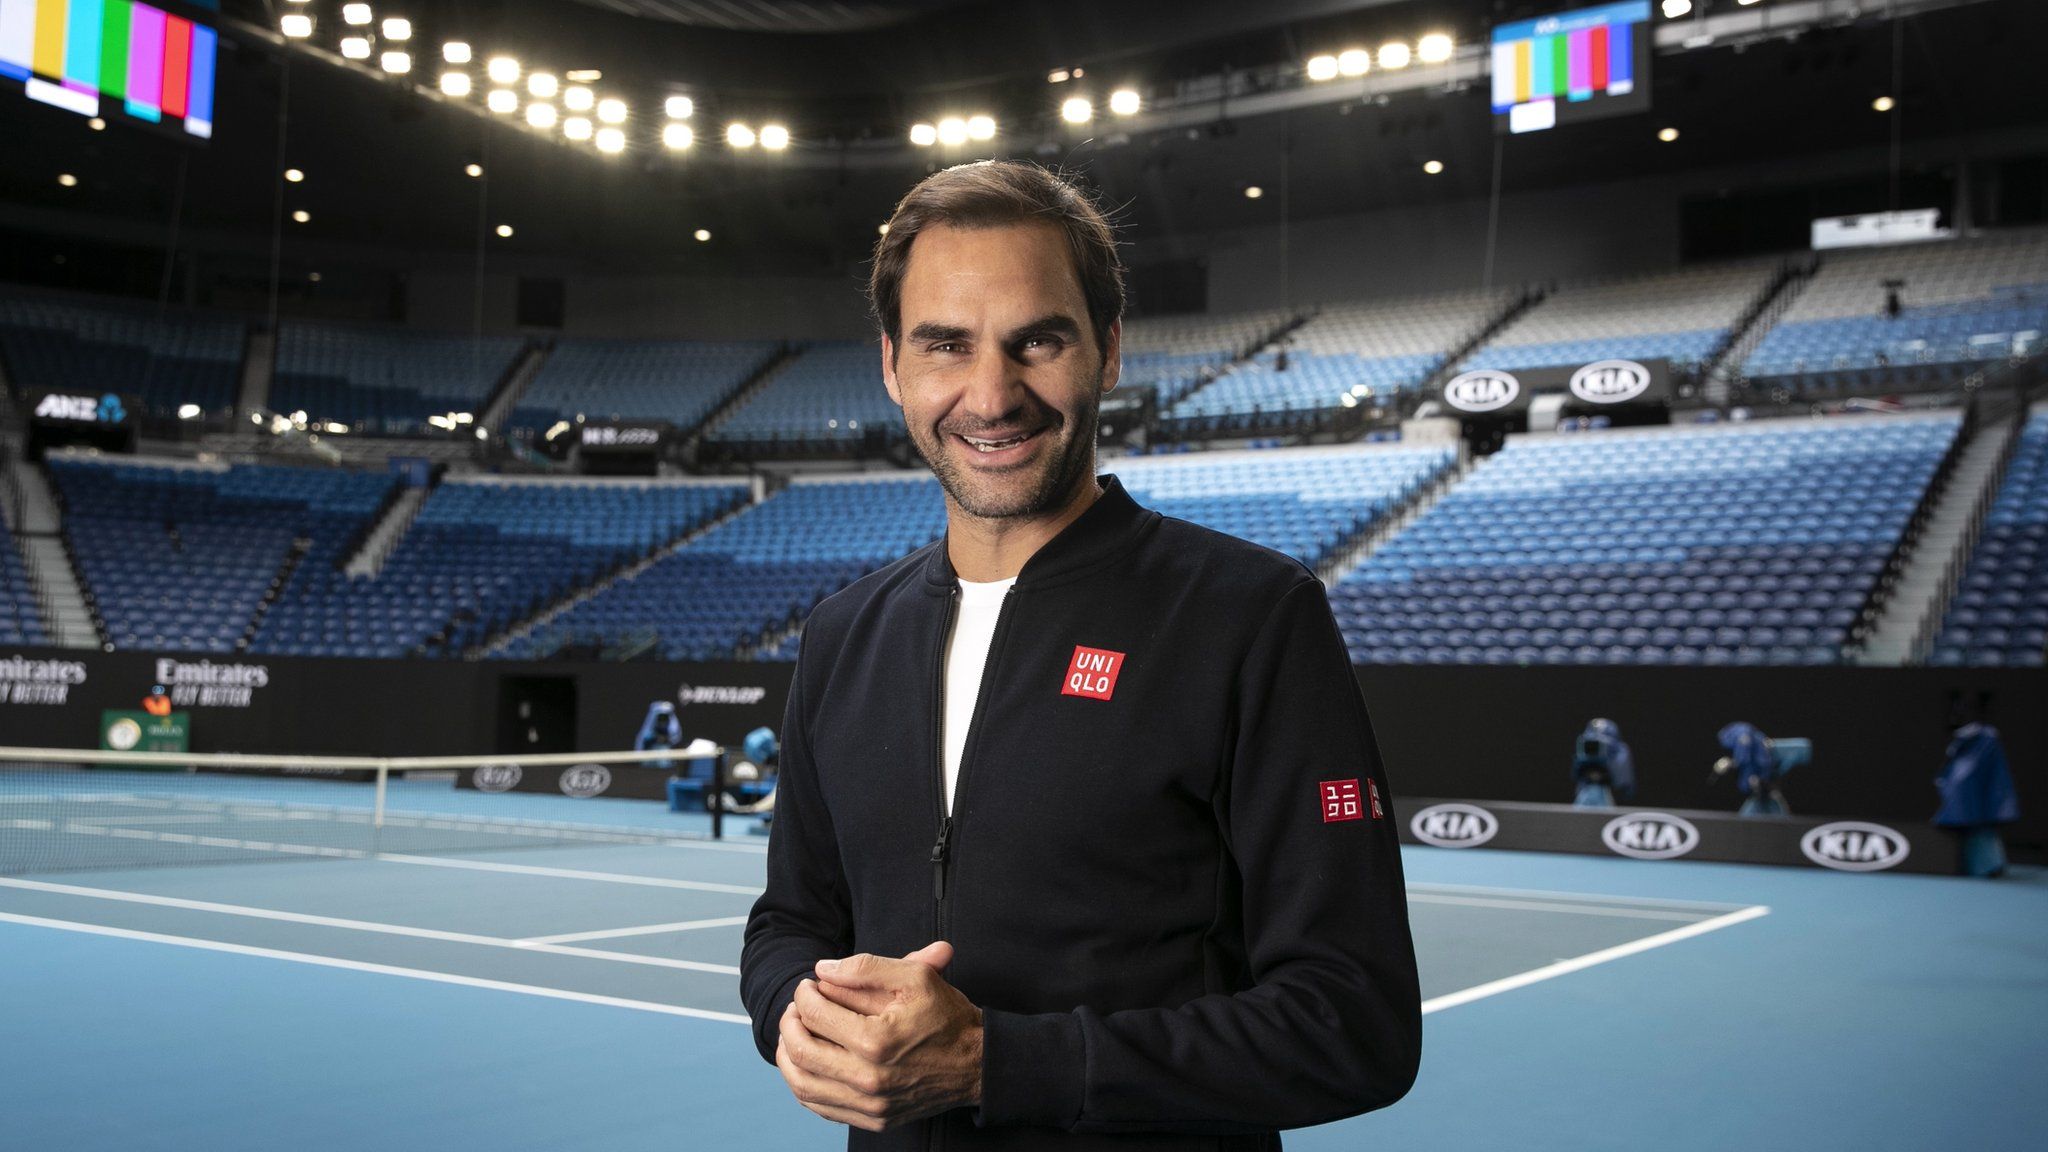 Roger Federer of Switzerland posing for a photo during a practice session ahead of the Australian Open tennis tournament at Rod Laver Arena in Melbourne, Victoria, Australia, 11 January 2020.